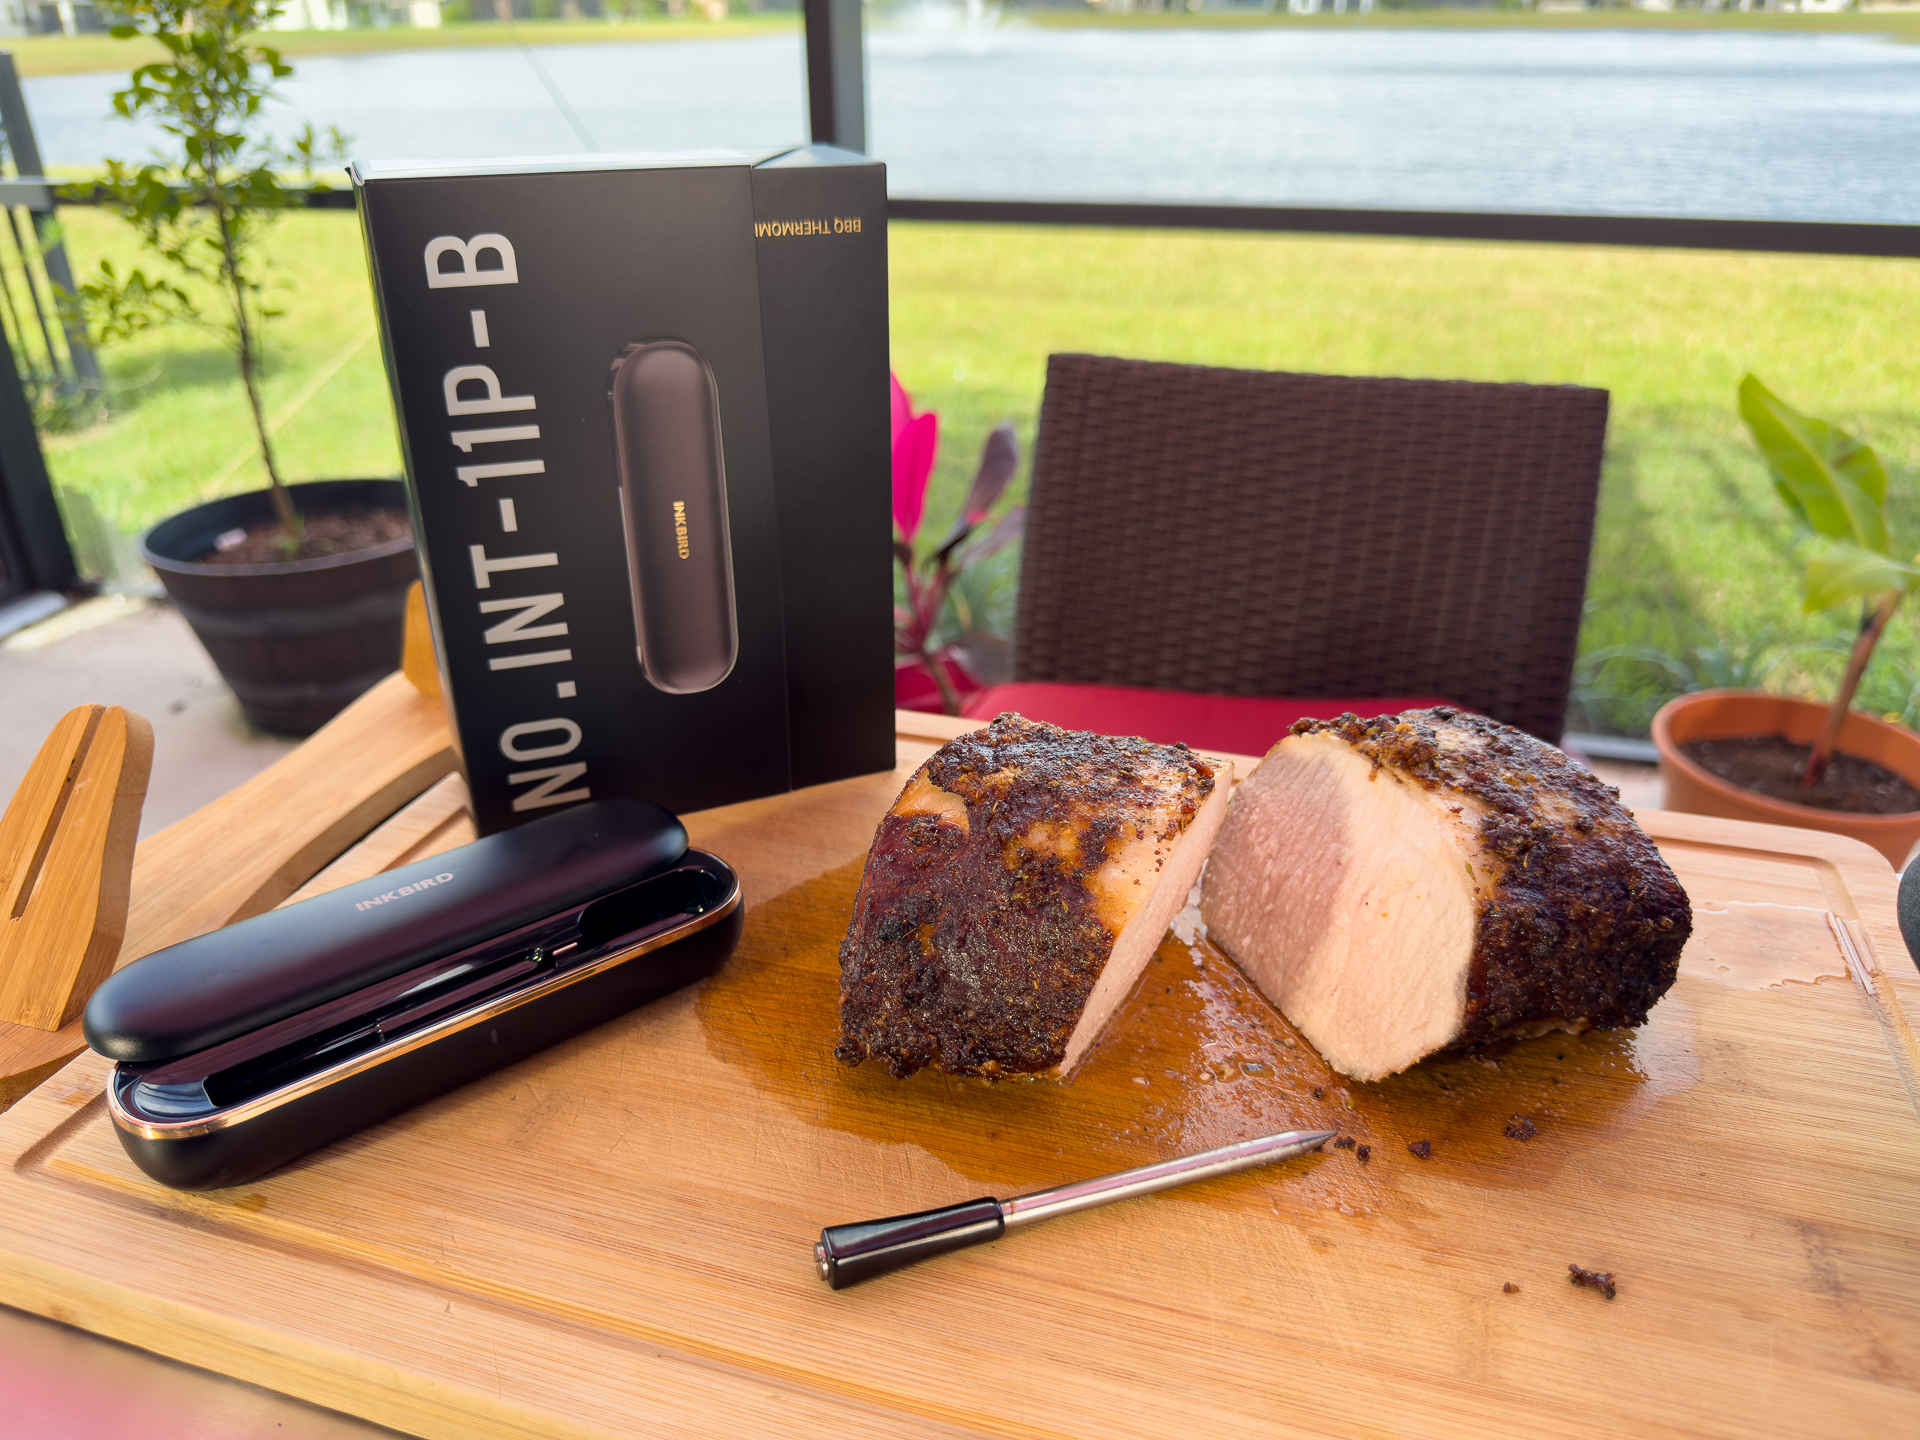 The INKBIRD INT-11P-B Wireless Thermometer, Packaging and a Pork roast cooked using the thermometer.